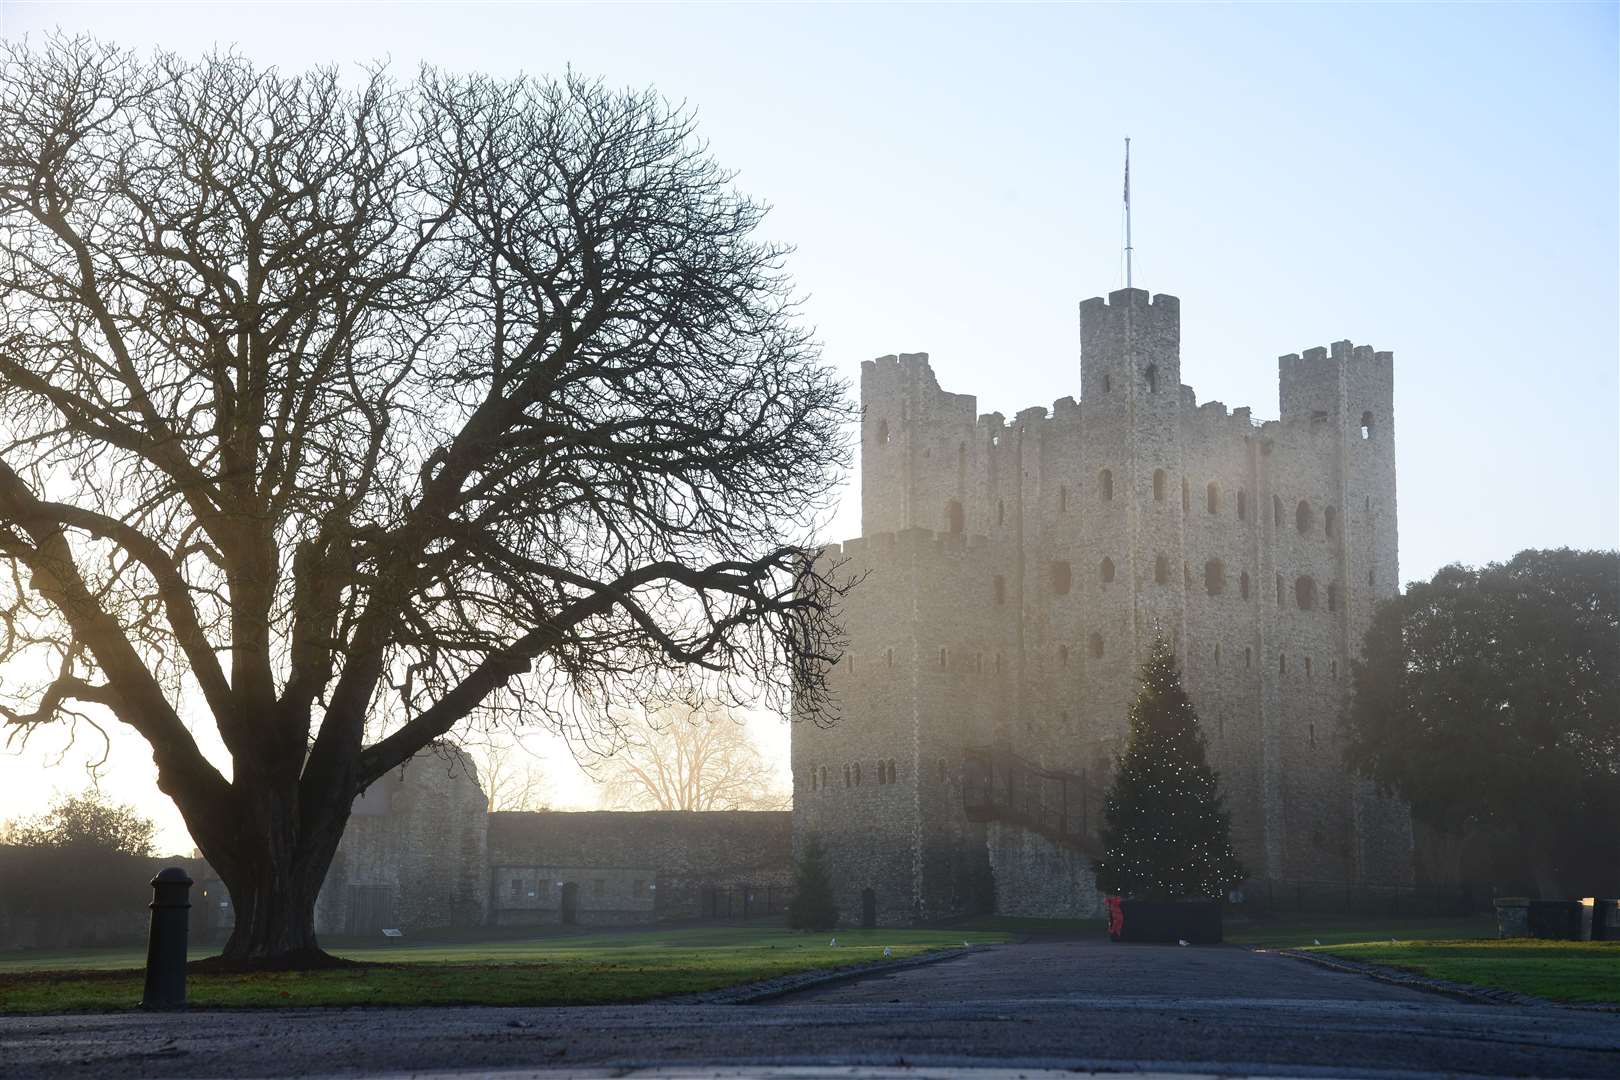 A dispersal order was imposed by police for the area around Rochester's historic town centre including the castle over the weekend